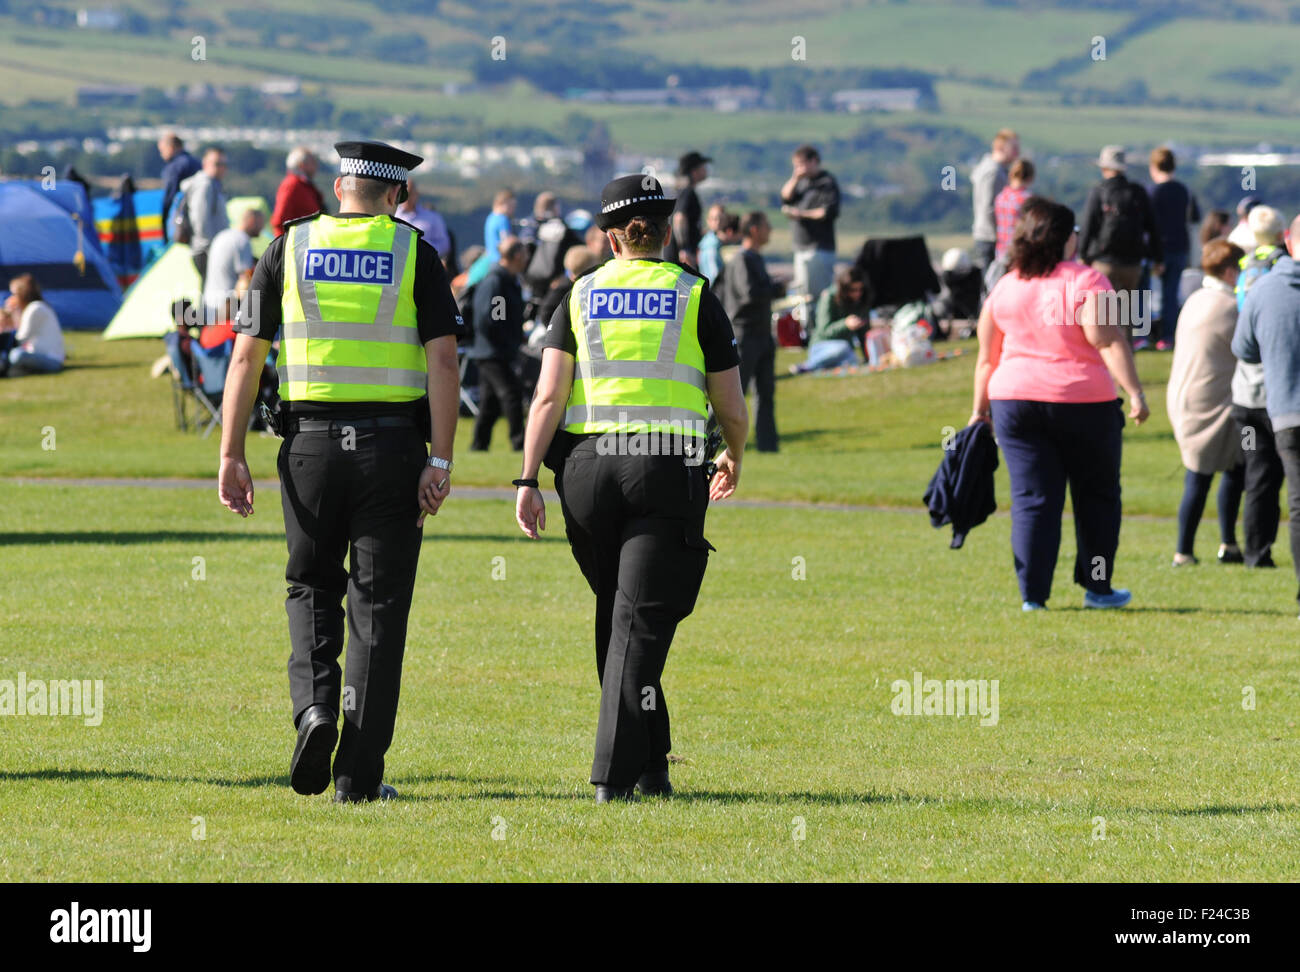 POLICE OFFICERS ON PATROL AT OUTDOOR EVENT FESTIVAL RE POLICING NUMBERS POLICEMEN OFFICER WALKING UNIFORM CUTS CRIMINAL  UK Stock Photo